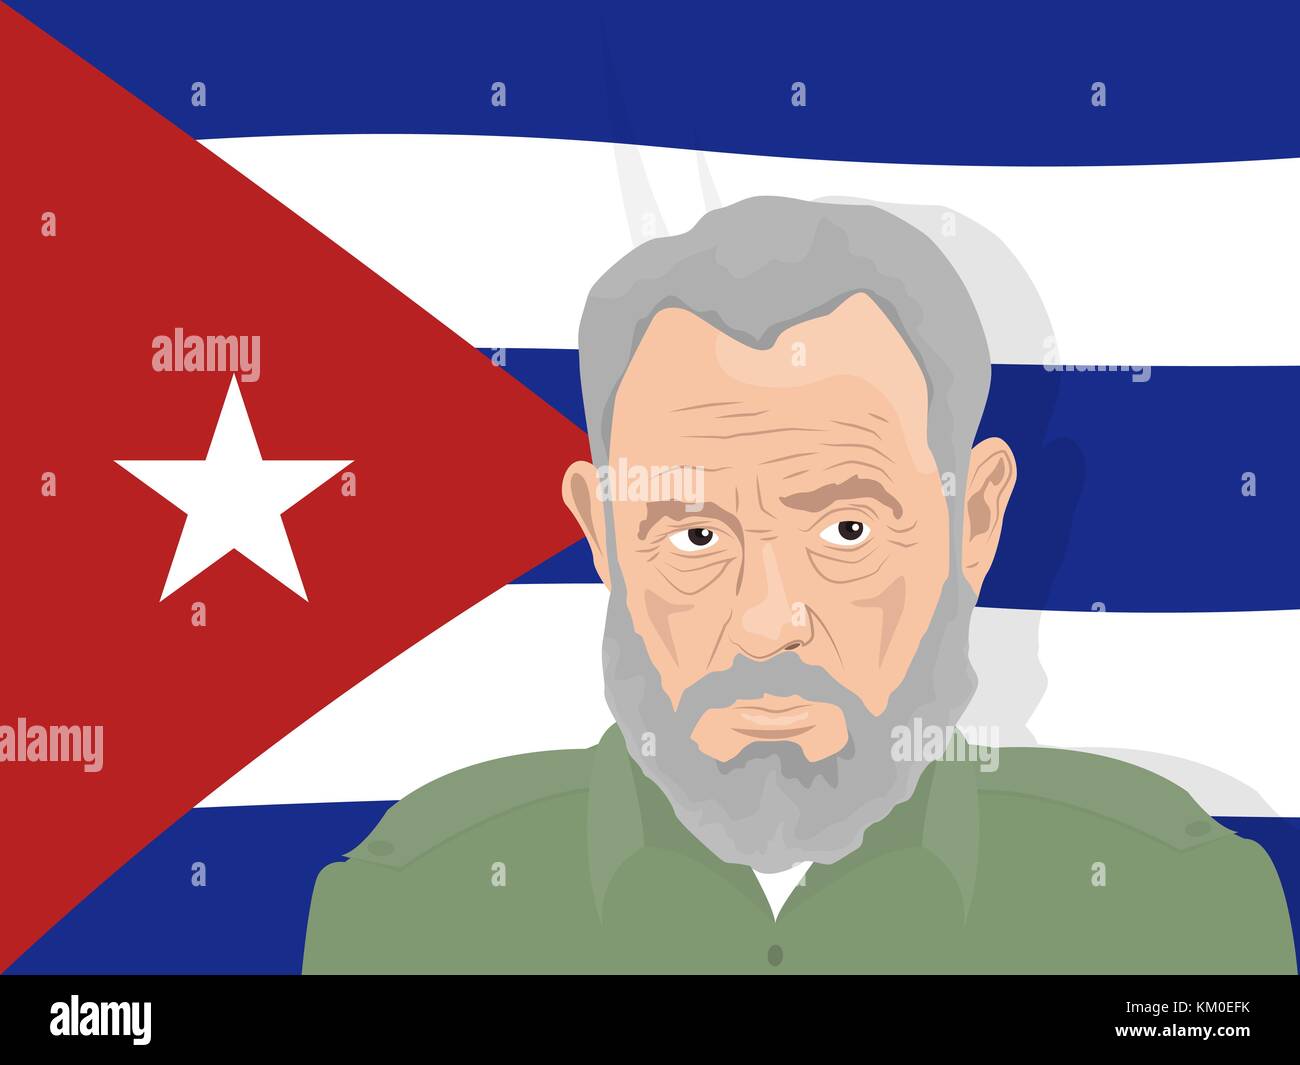 02.12.2017 Editorial illustration of Fidel Castro - The former President of Cuba on white background. Stock Vector